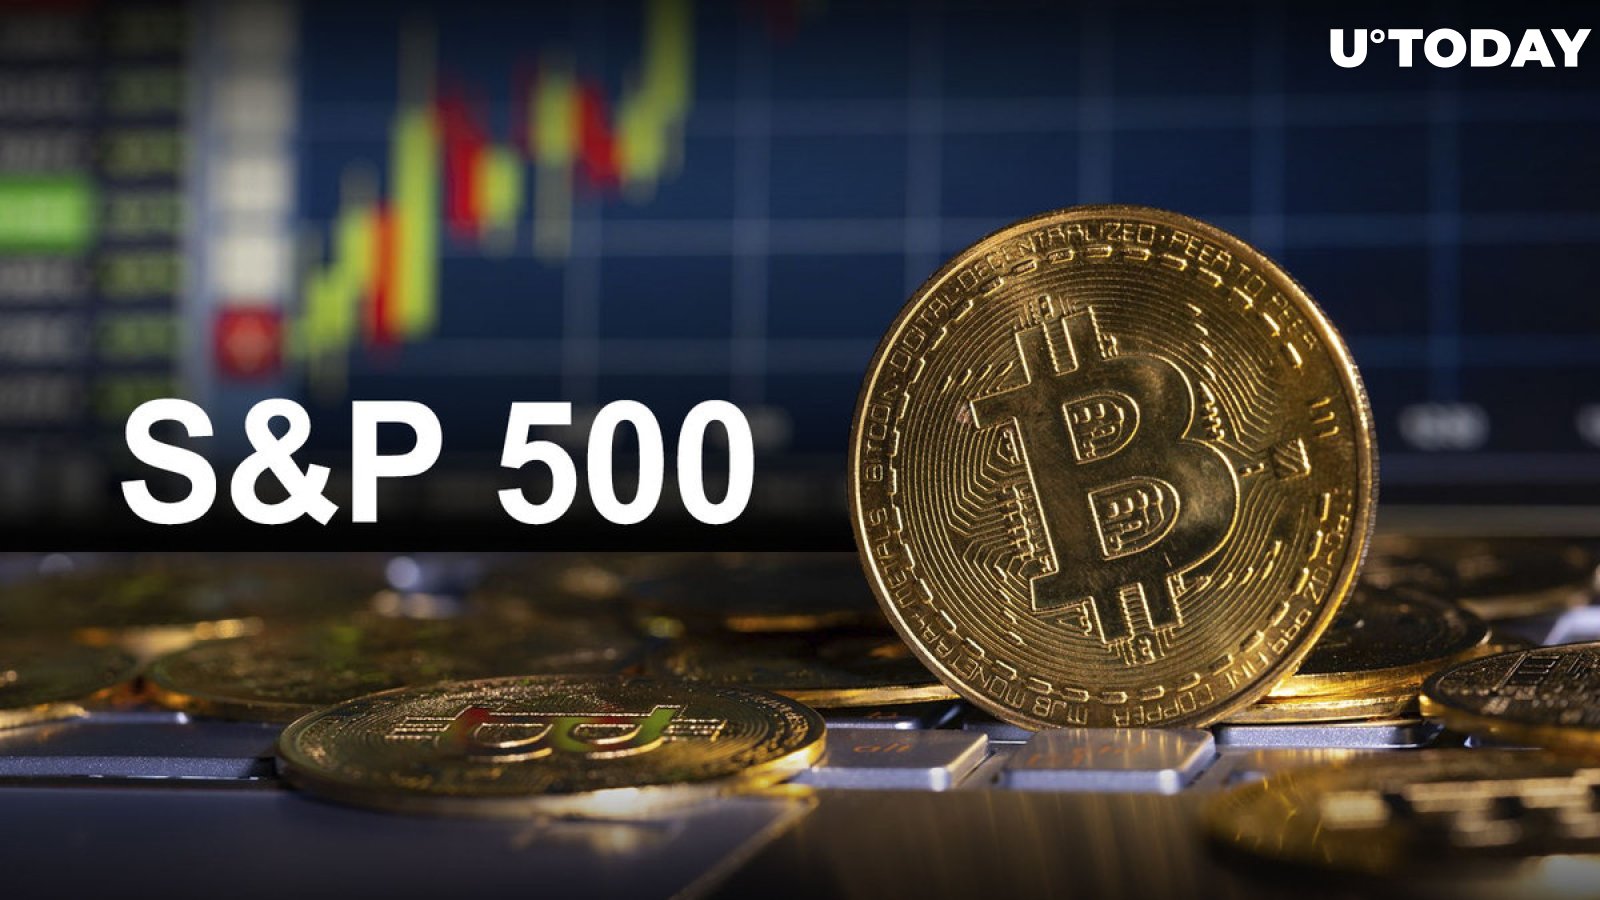 Bitcoin's Correlation to S&P 500 Plunges as BTC Smashes Index by Weekly Returns